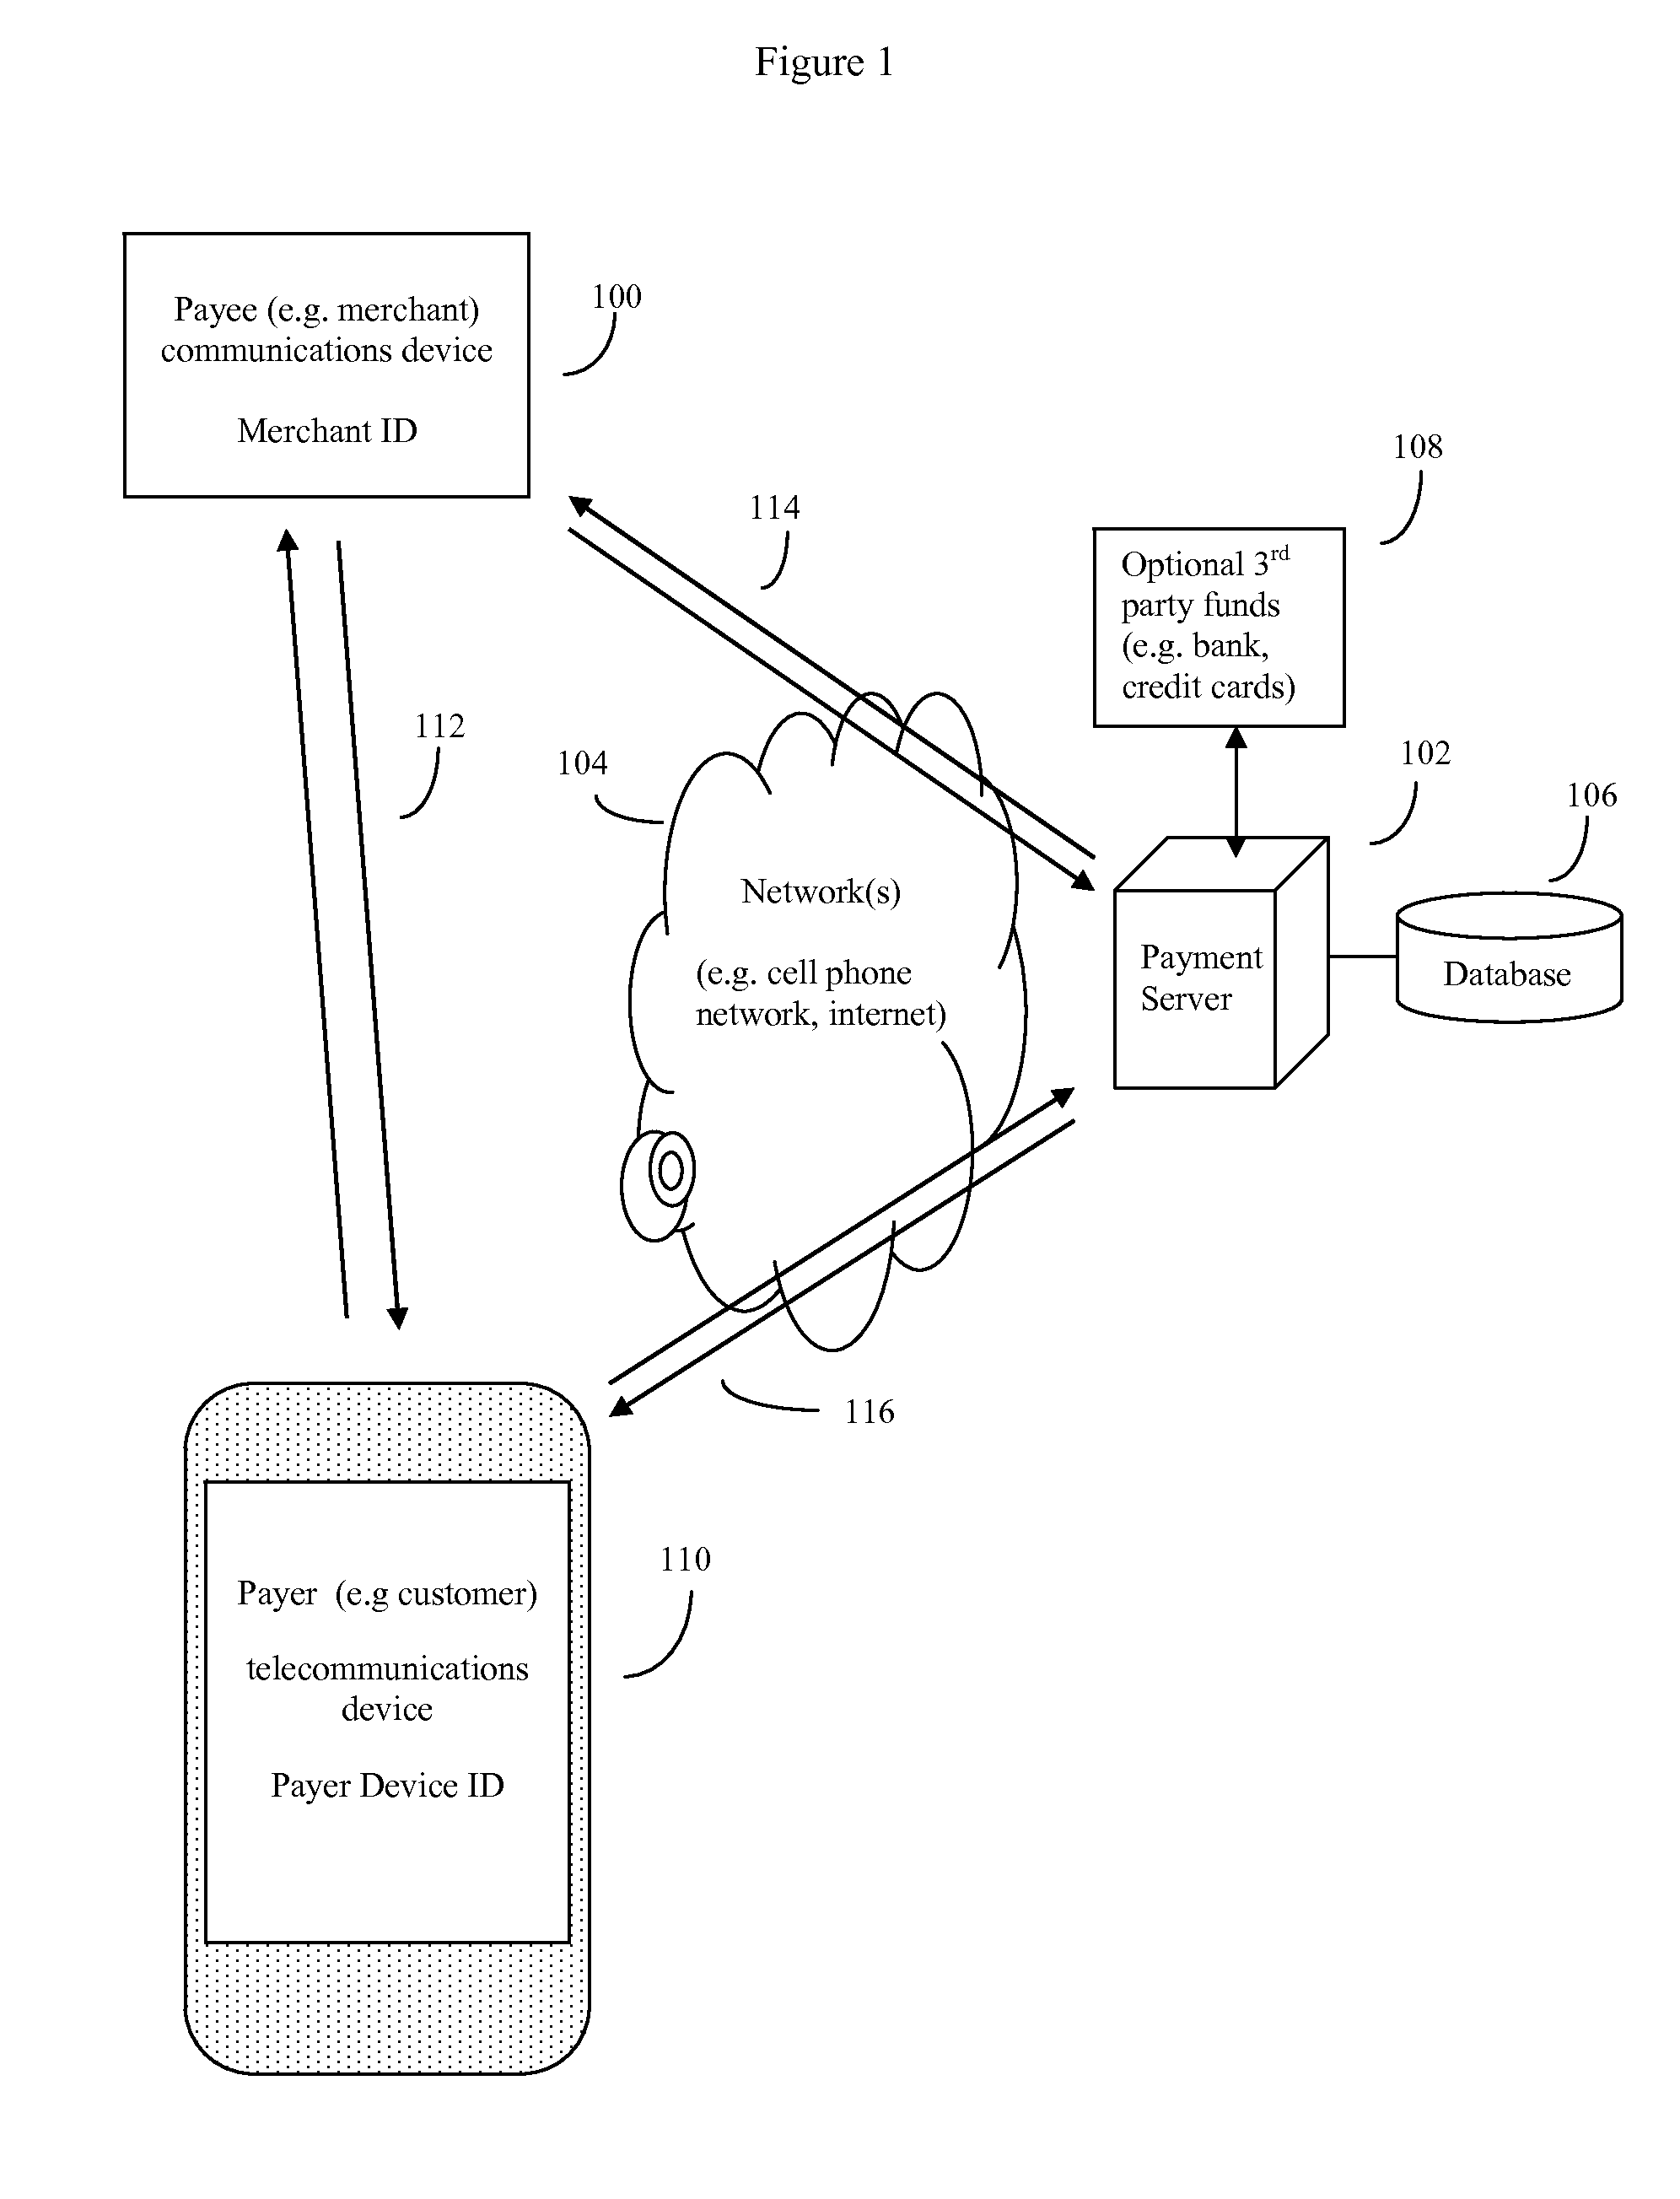 System and method of electronic payment using payee provided transaction identification codes